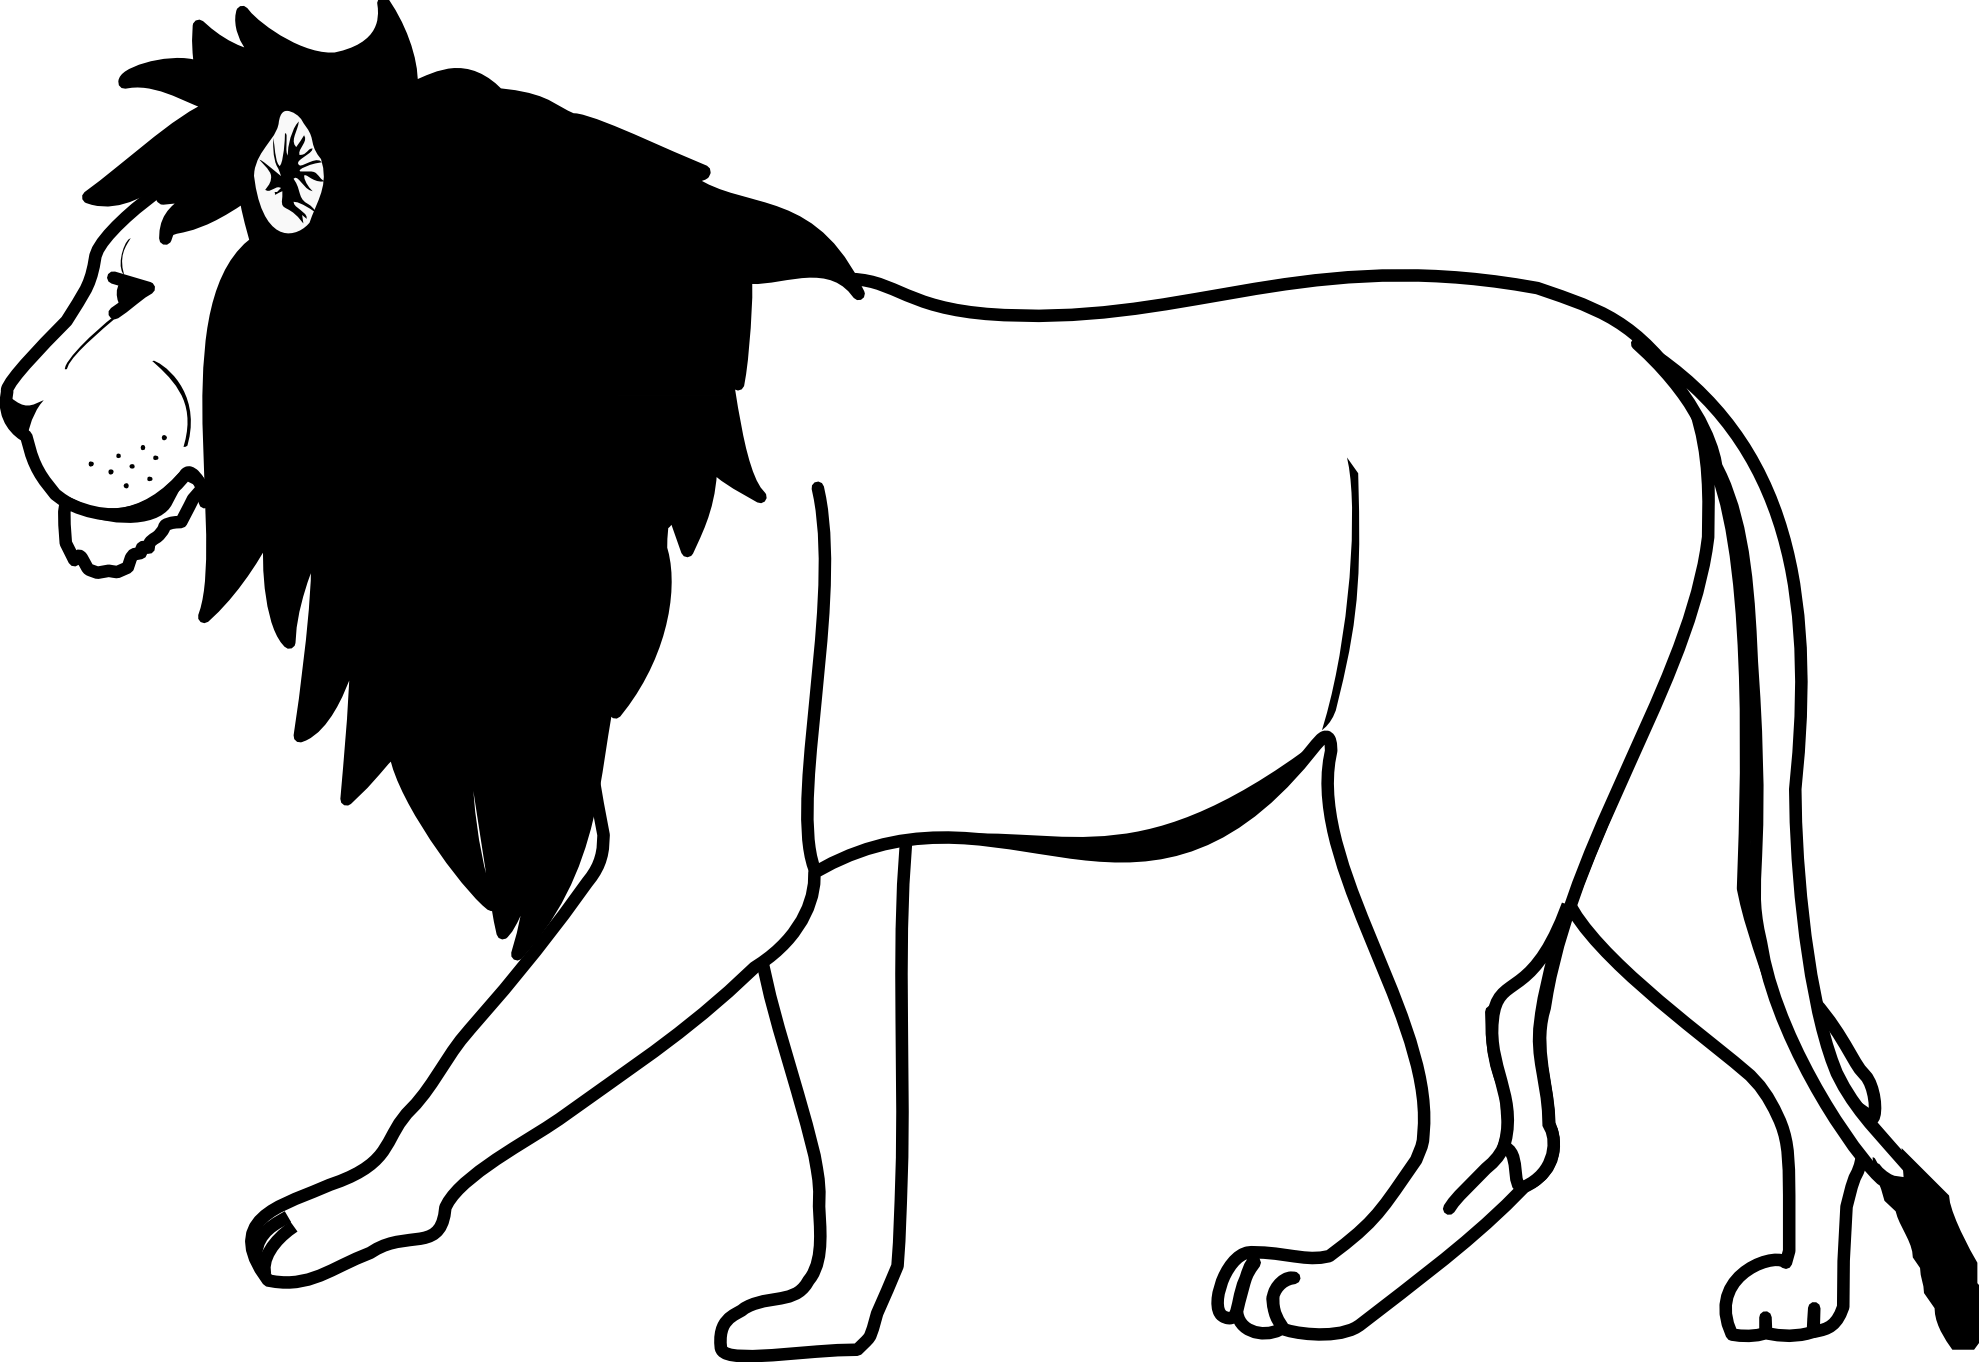 Lion  black and white lion clipart black and white